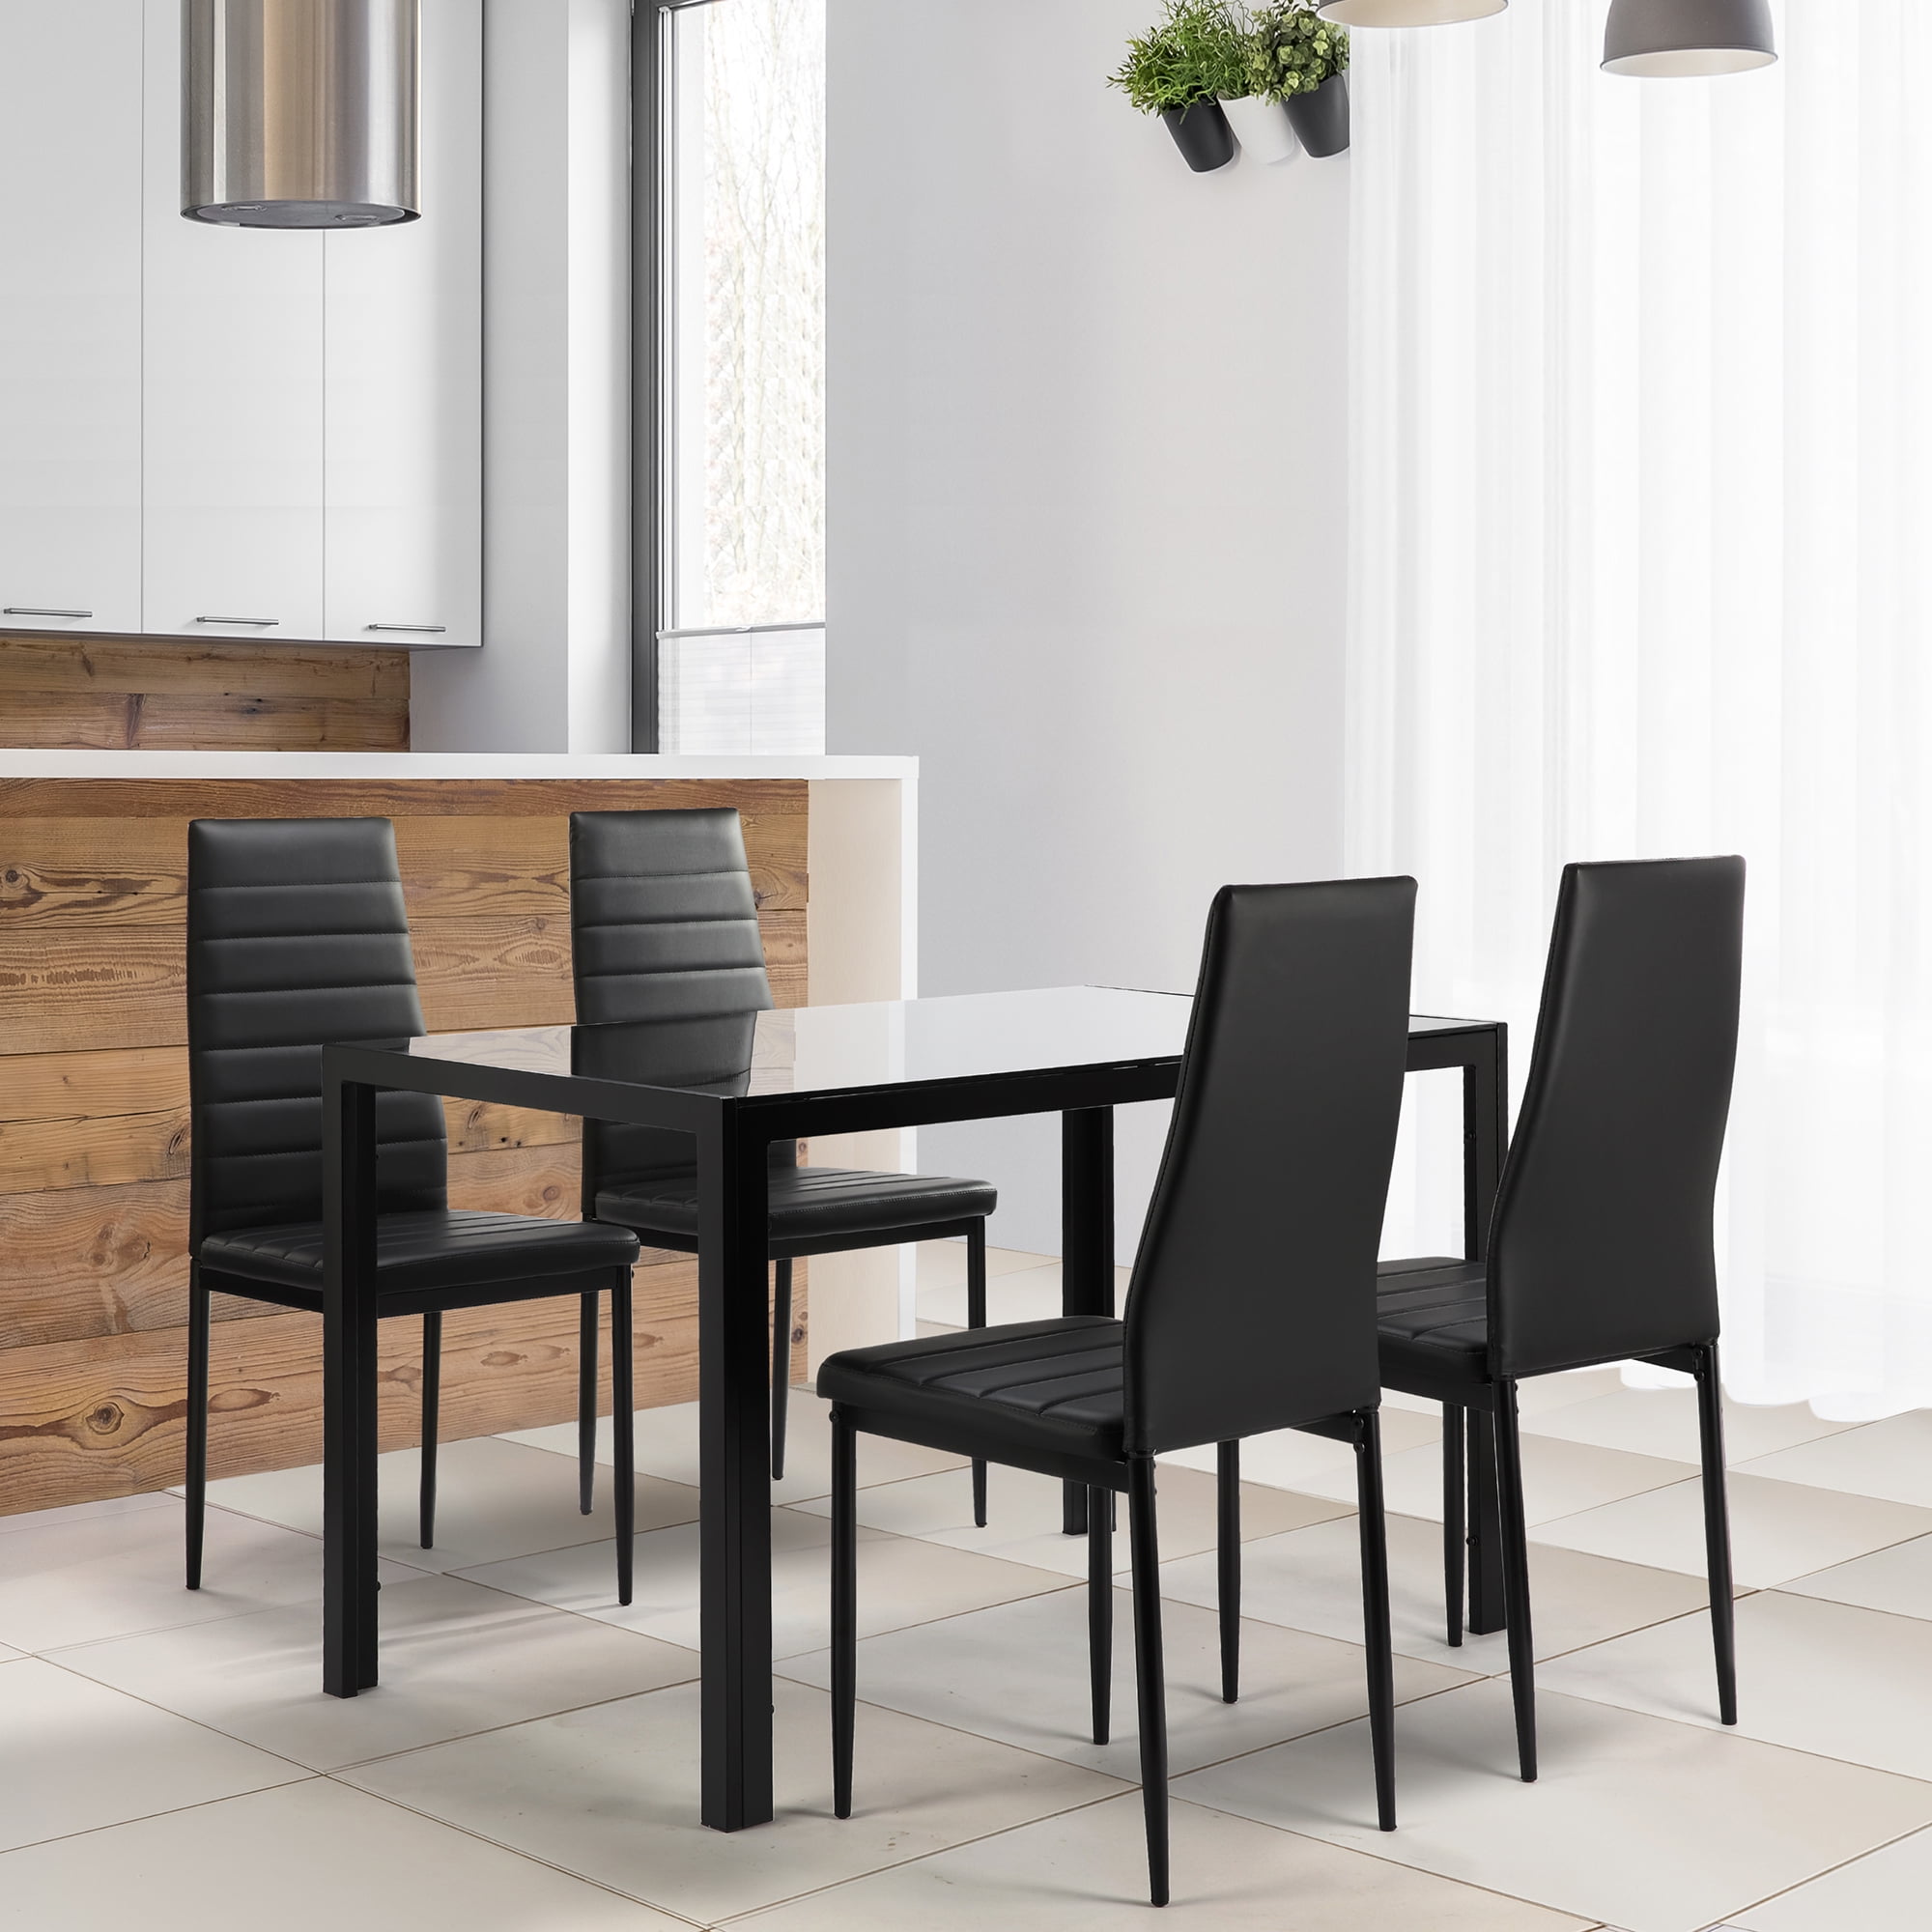 Dining Chair Sets, Round Folding Tables That Seat 8mm